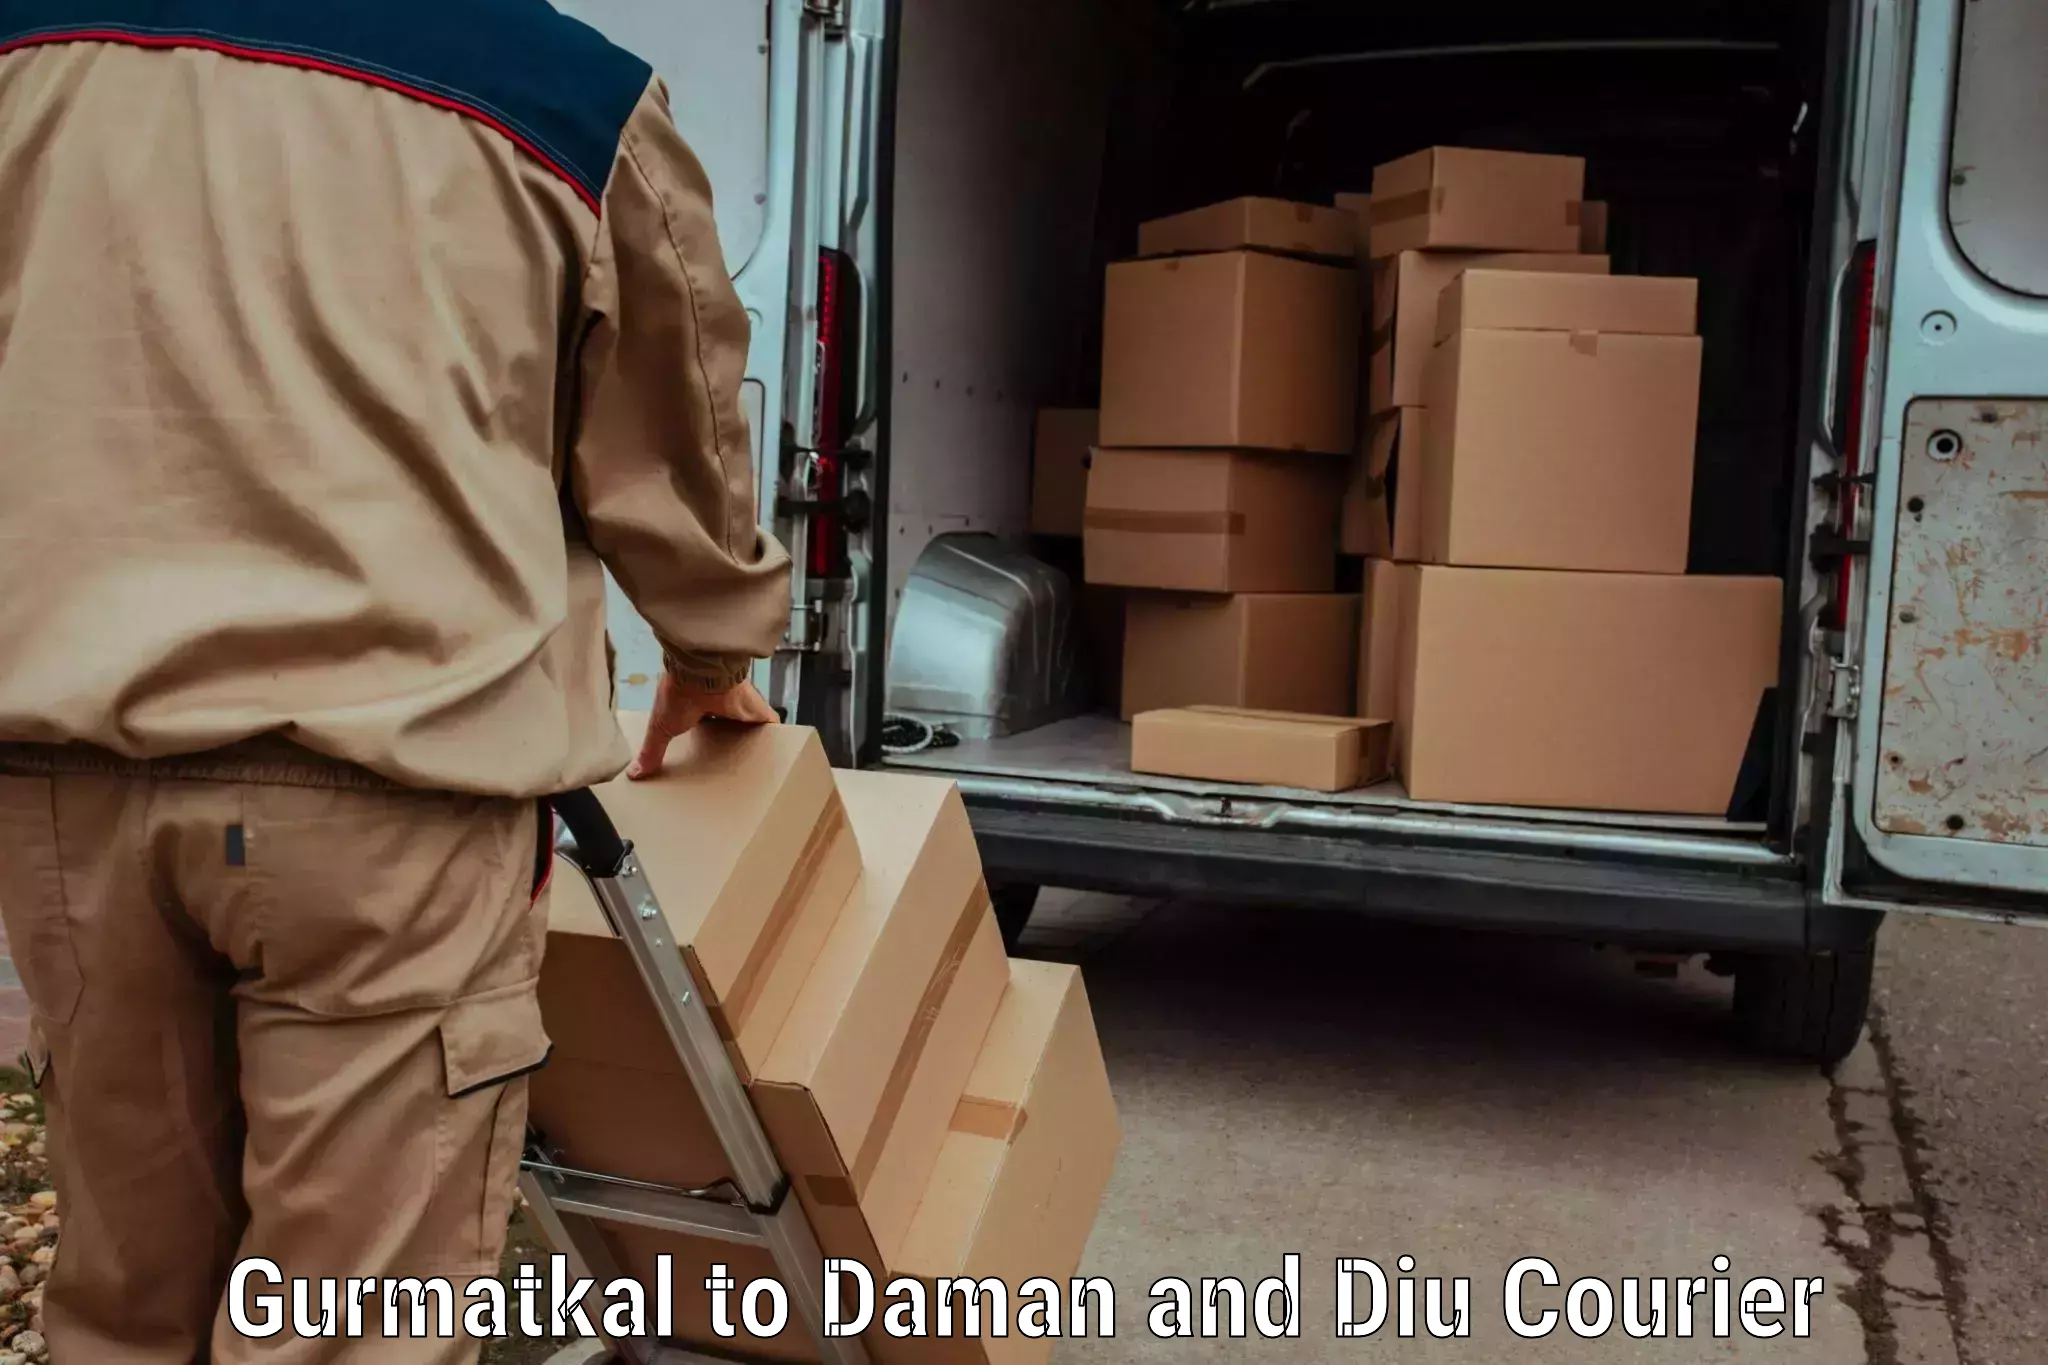 Customizable delivery plans Gurmatkal to Daman and Diu